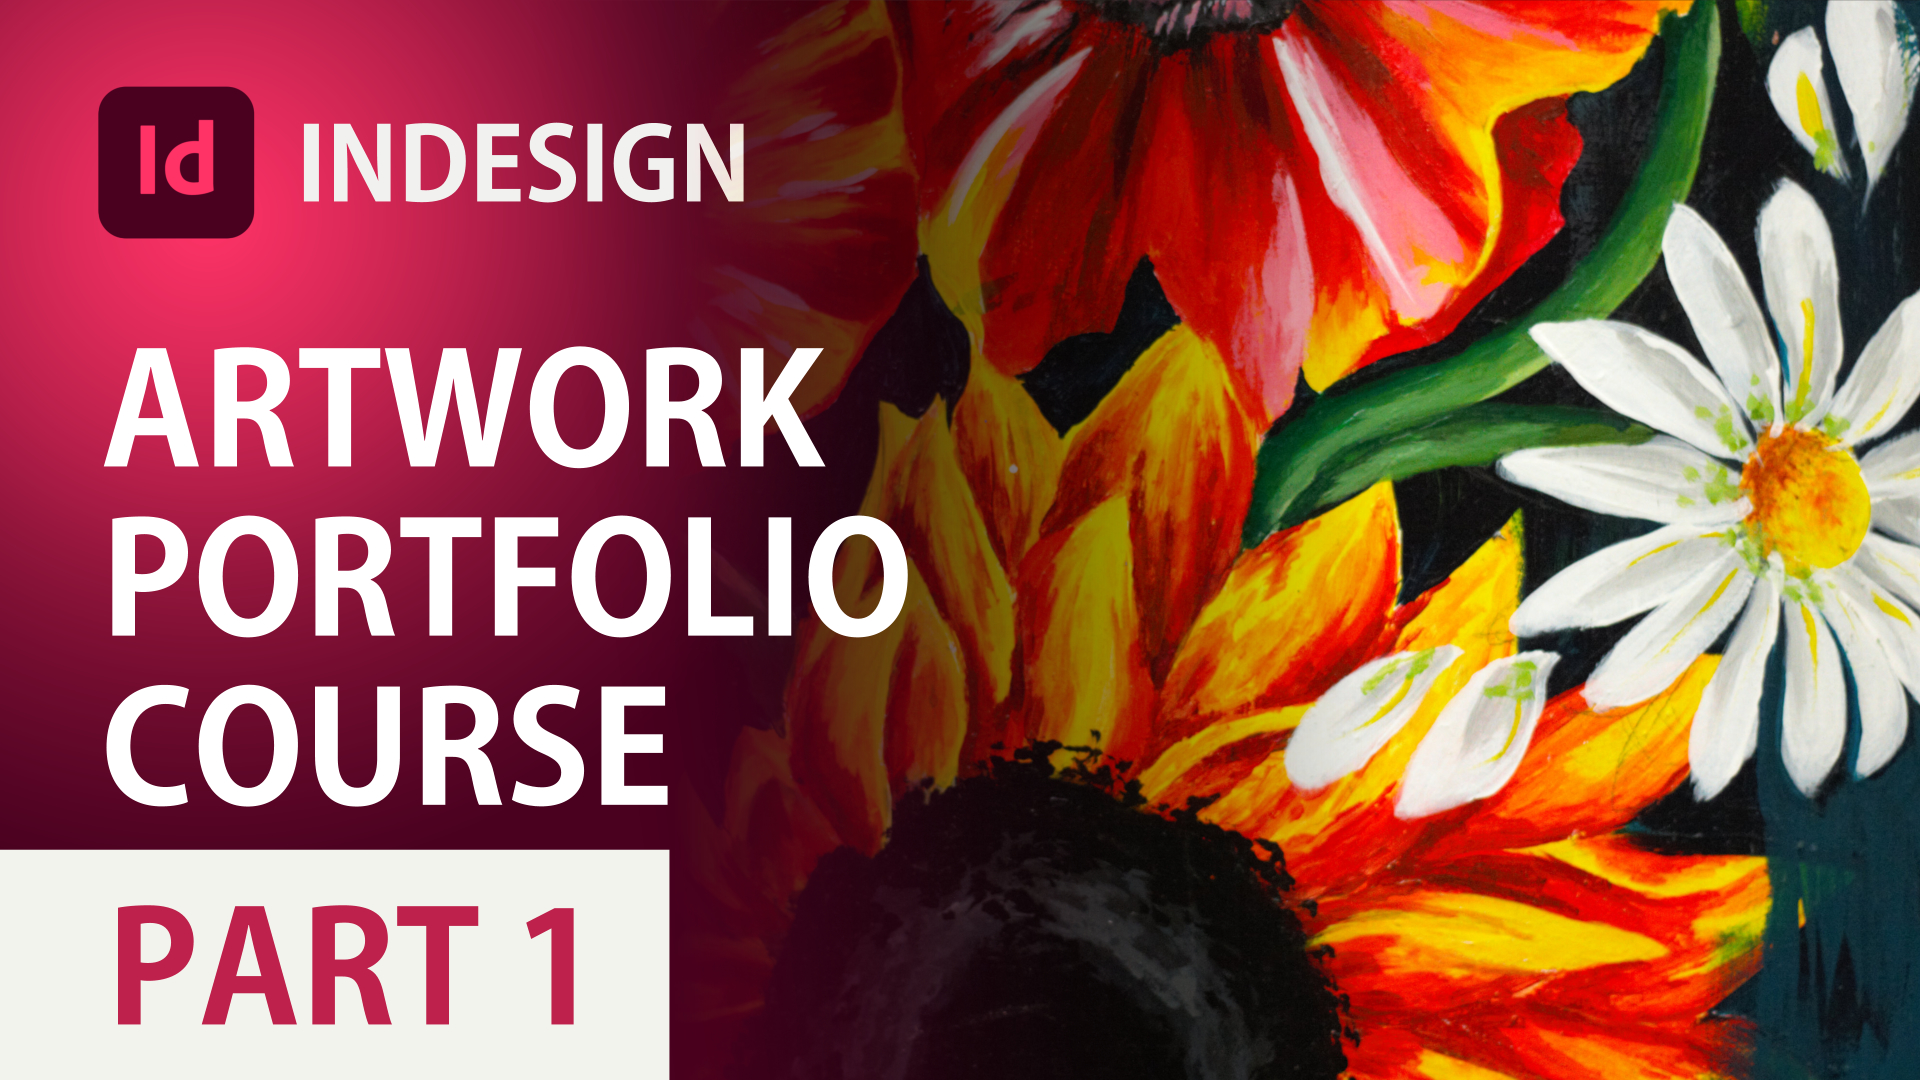 Create Art Portfolio for University in Adobe InDesign (Part 1): INTRODUCTION to InDesign Course